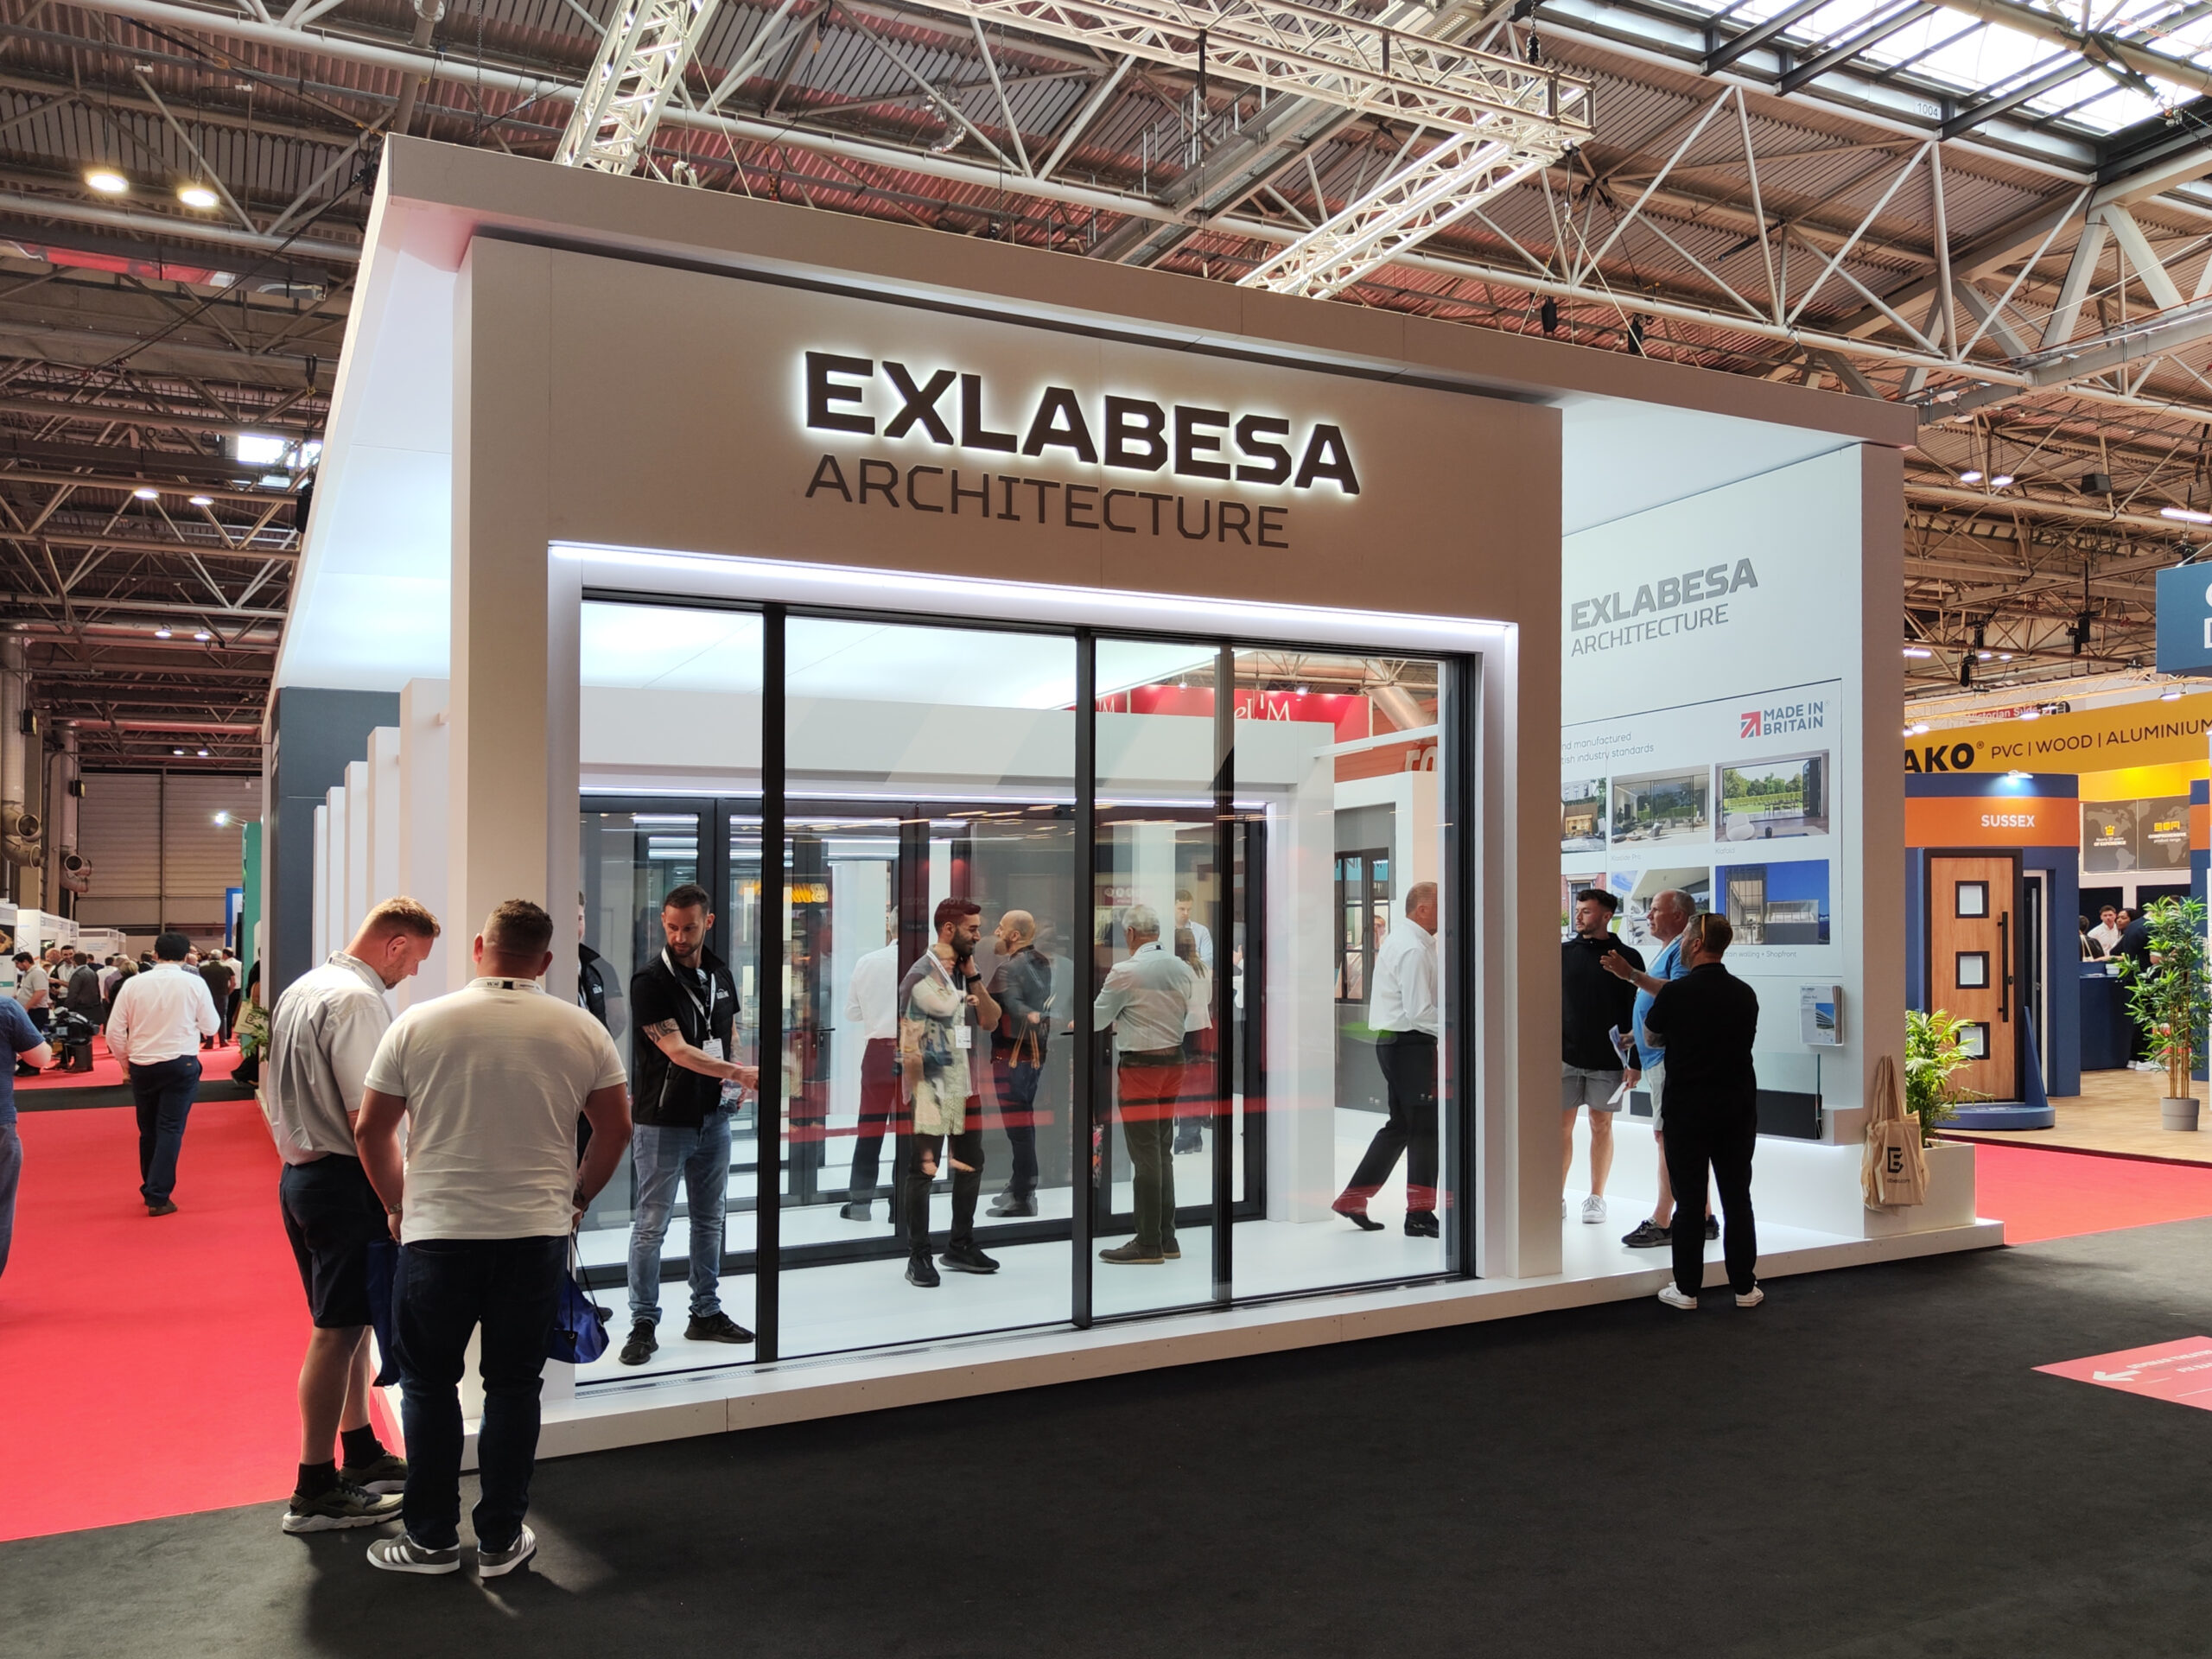 Exlabesa Architecture’s successful participation at the FIT Show